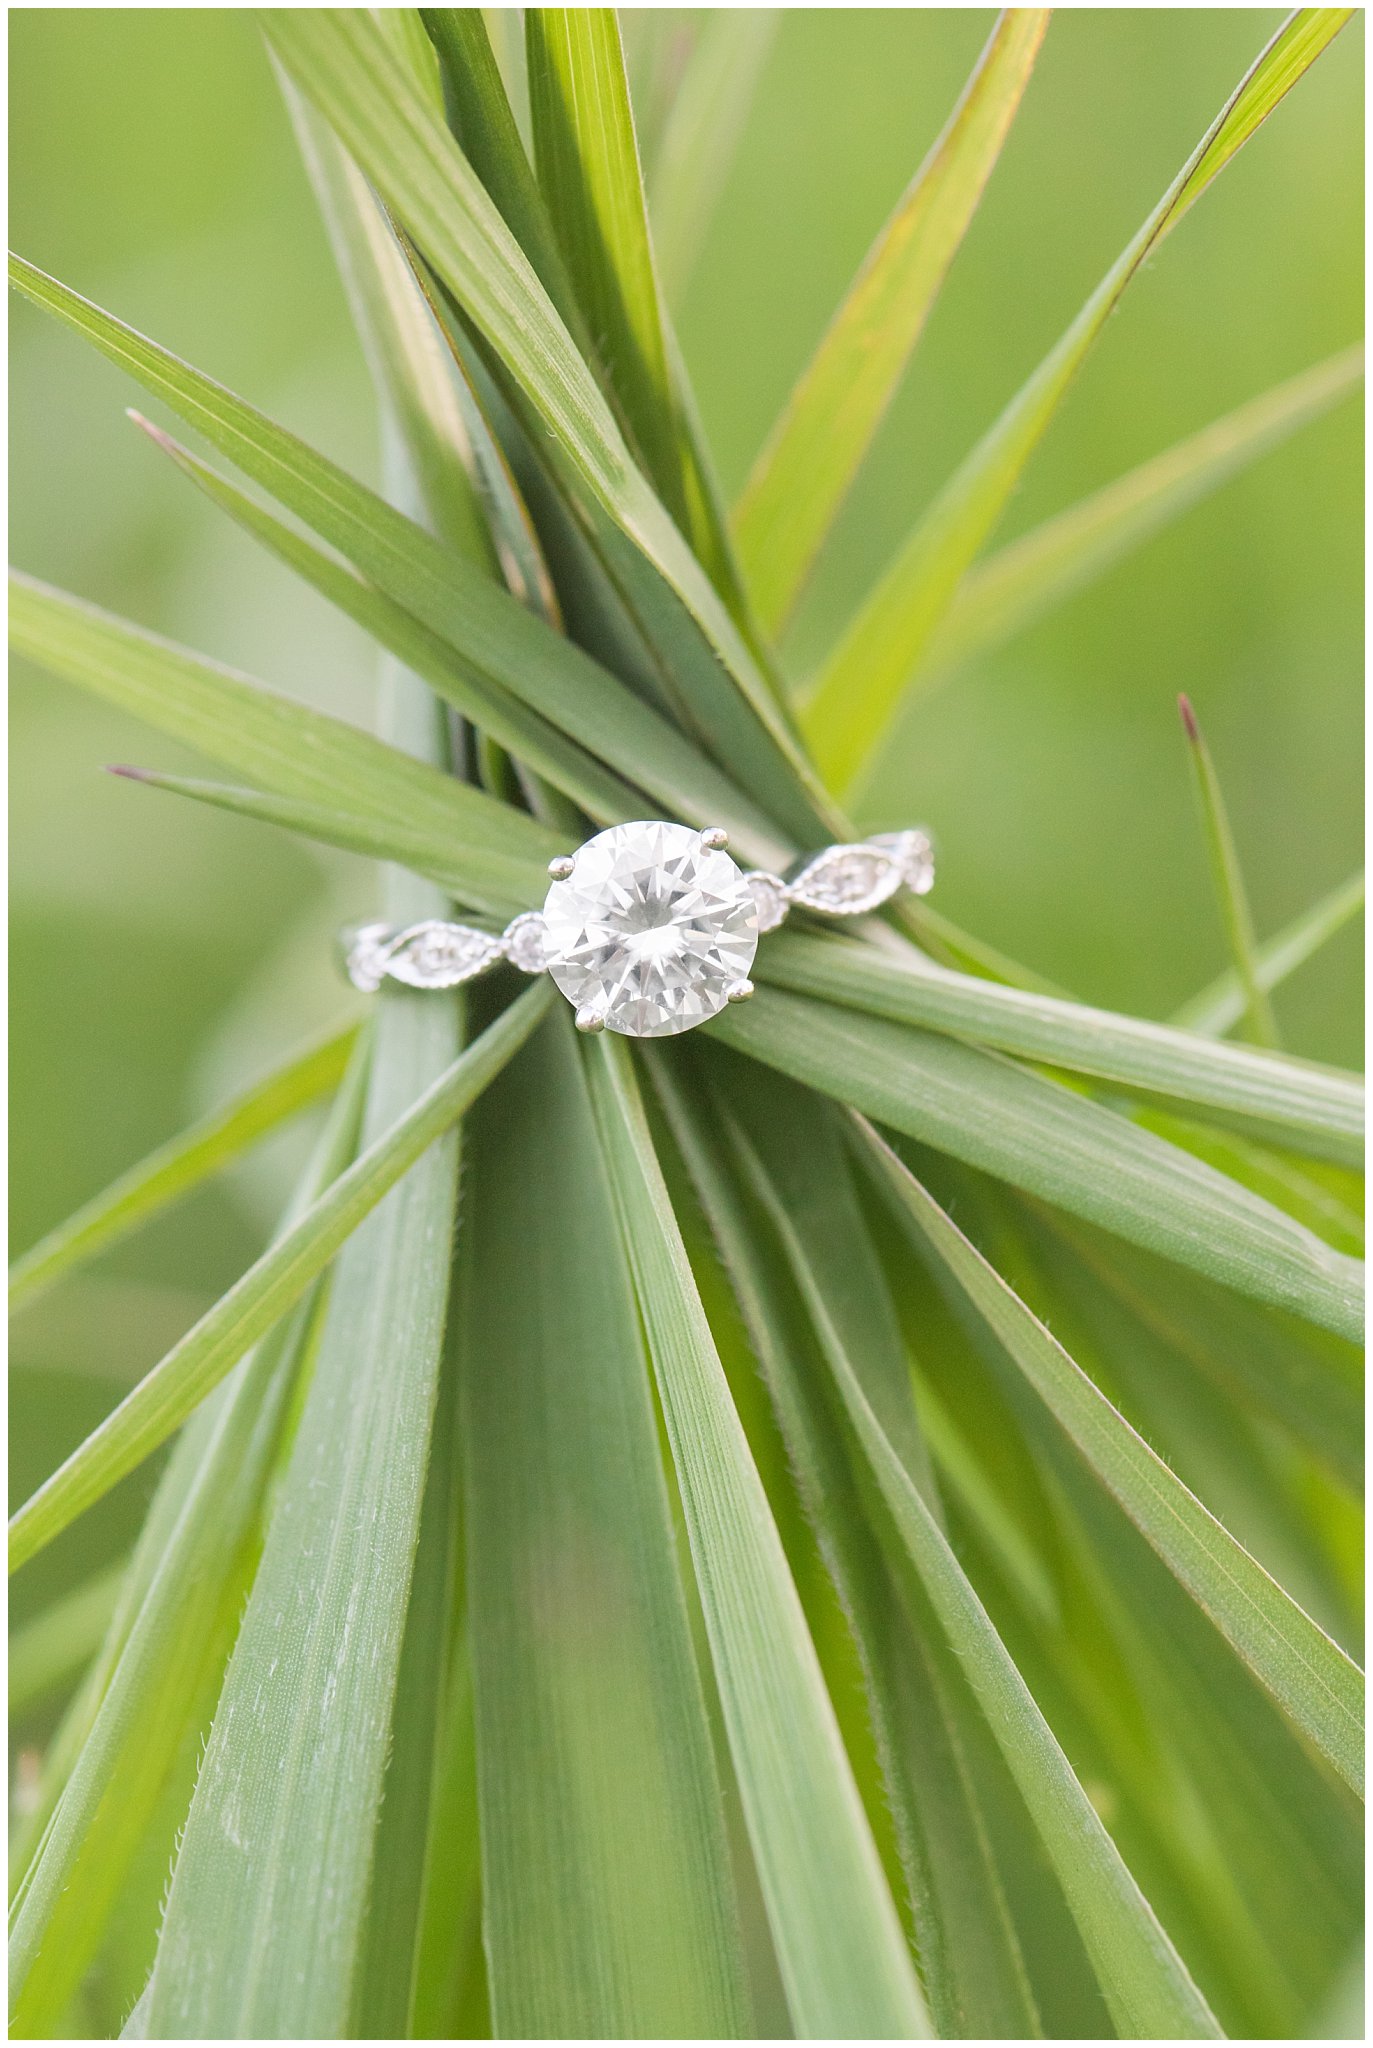 Engagement ring on green grass | Top Utah Wedding and Couples Photos 2019 | Jessie and Dallin Photography